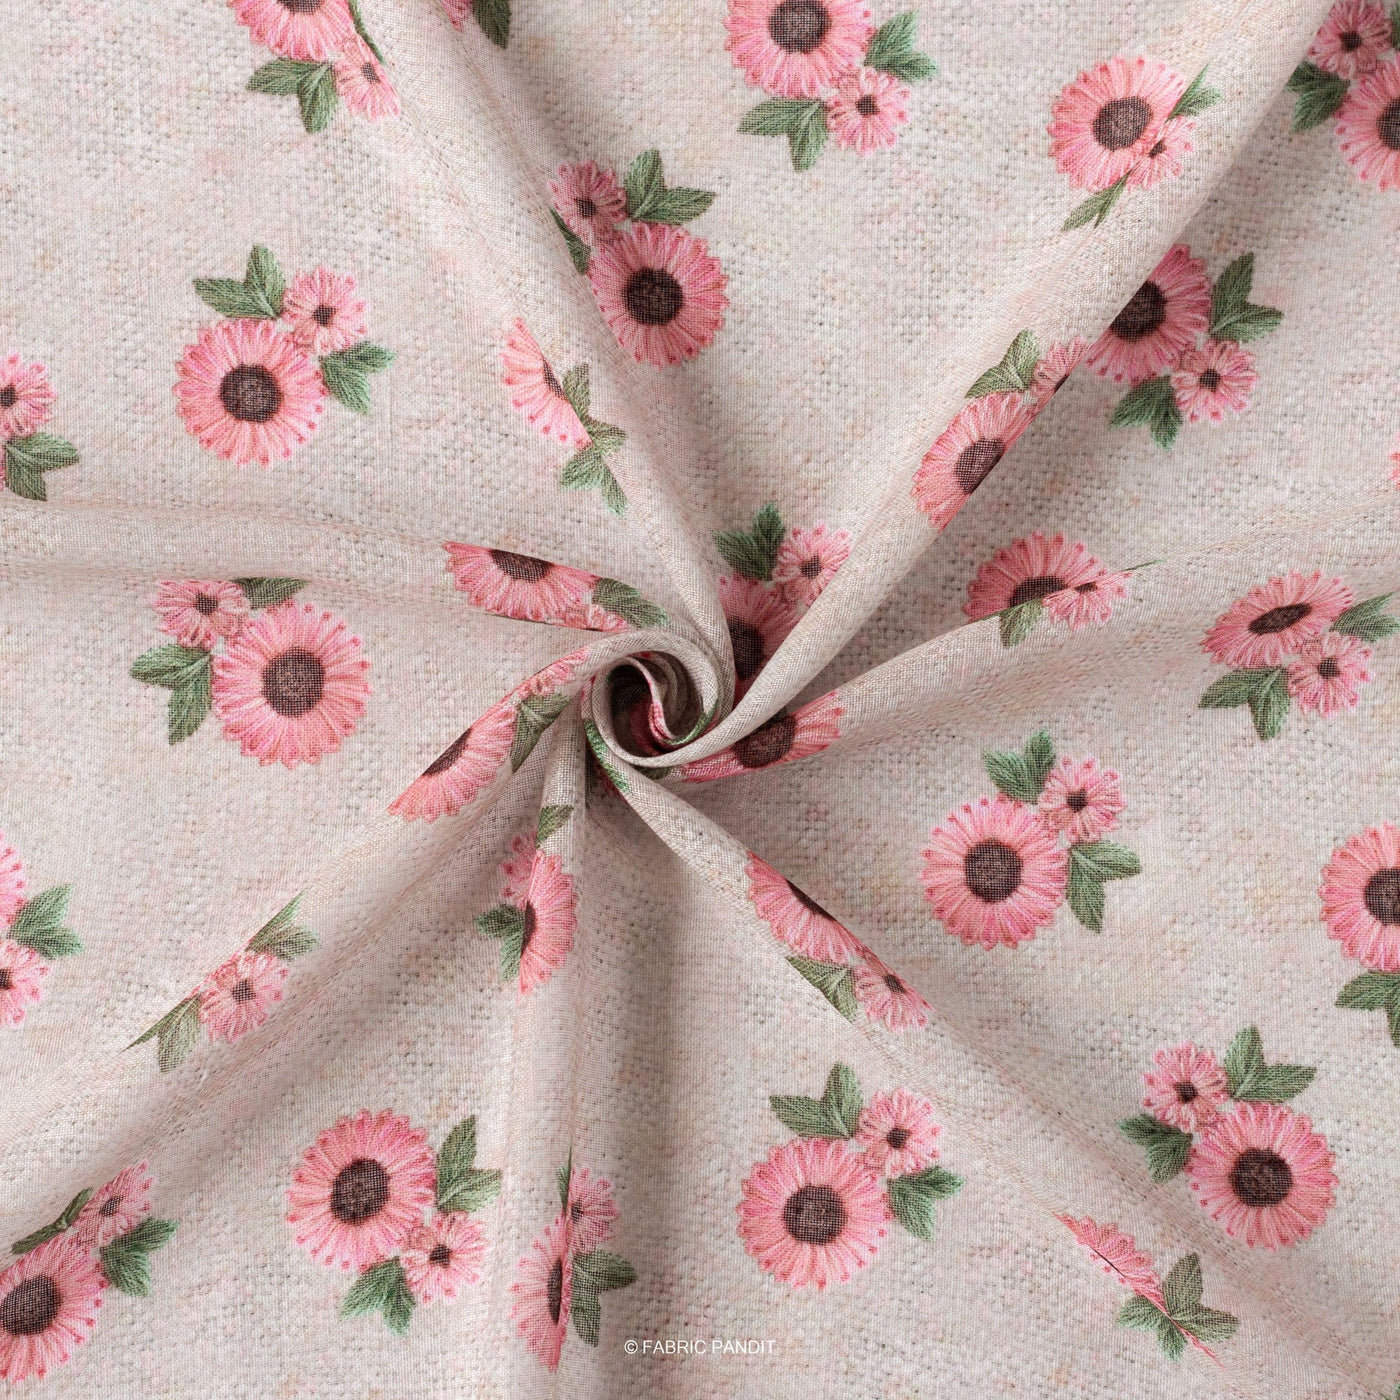 Fabric Pandit Cut Piece (Cut Piece) Beige and Pink Flower Print Digital Printed Linen Neps Fabric (Width 44 Inches)